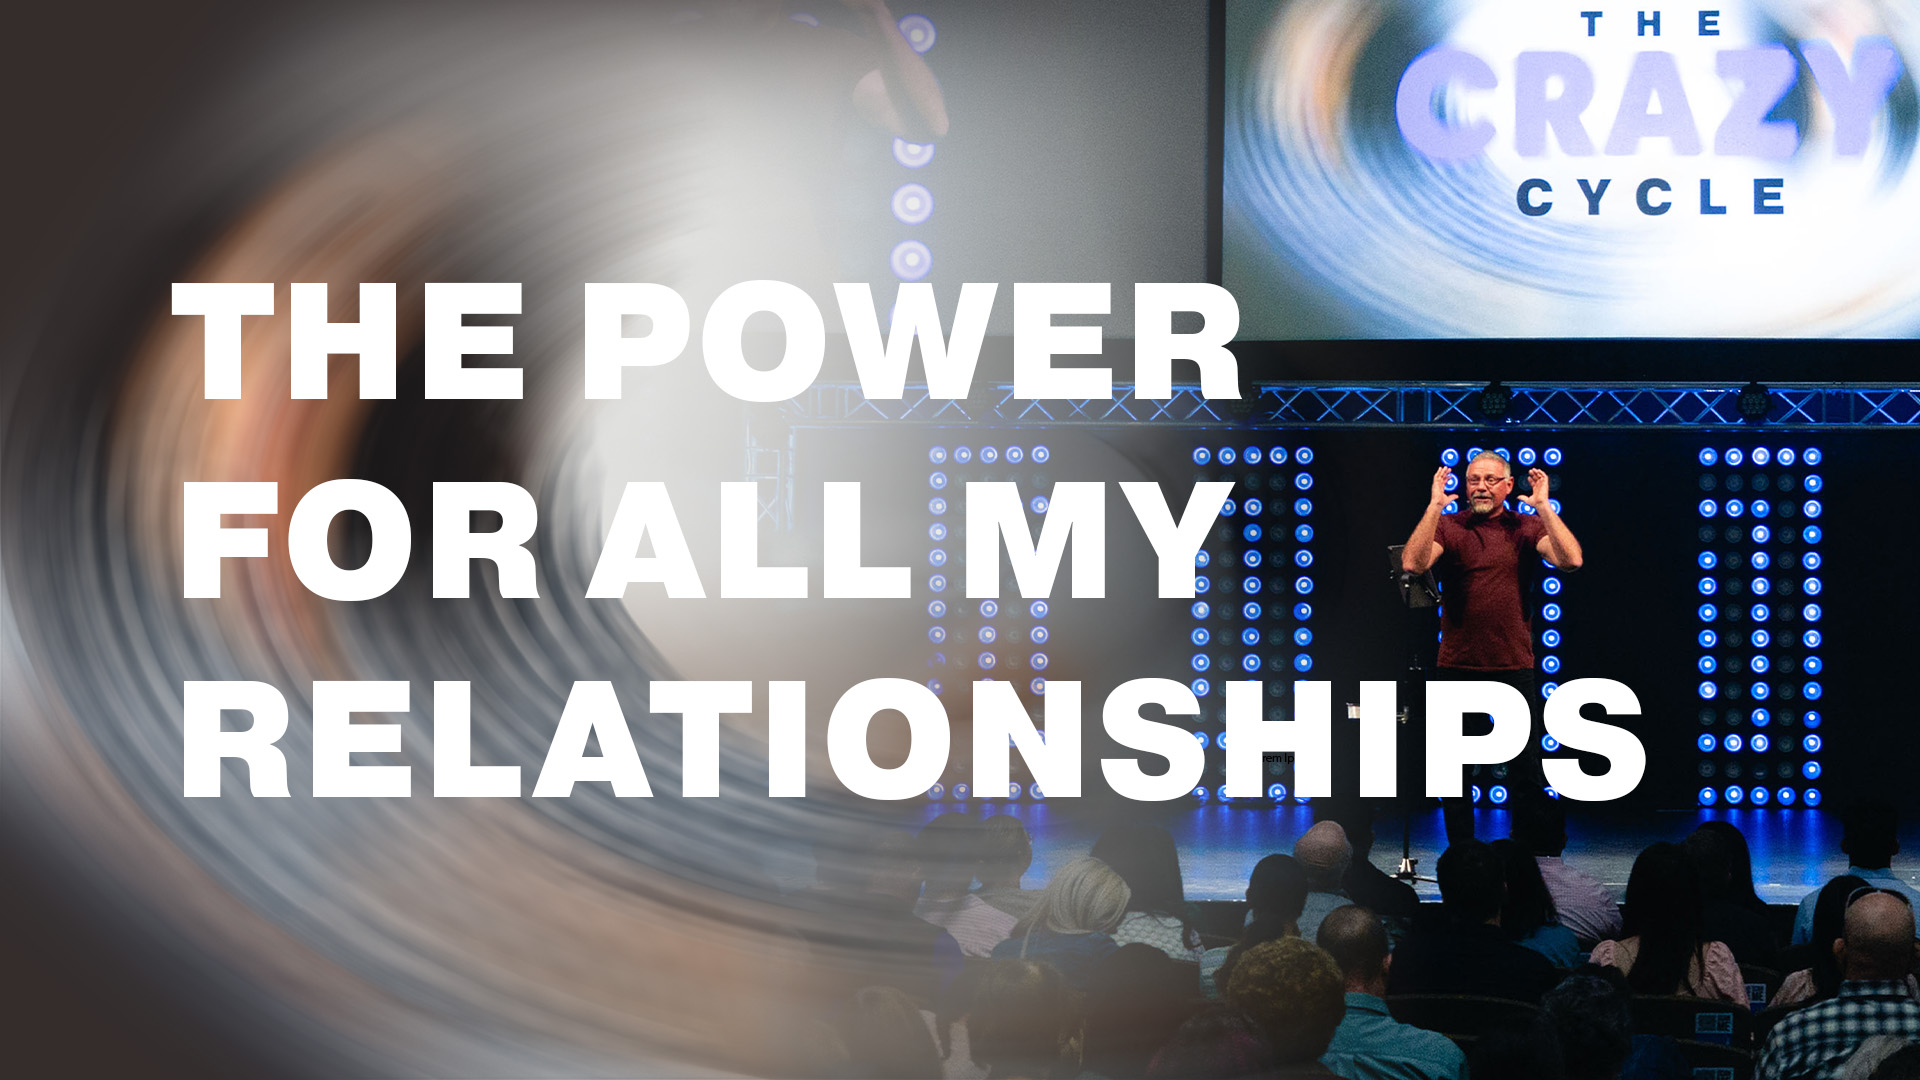 Jesus' Resurrection is the Power for All My Relationships